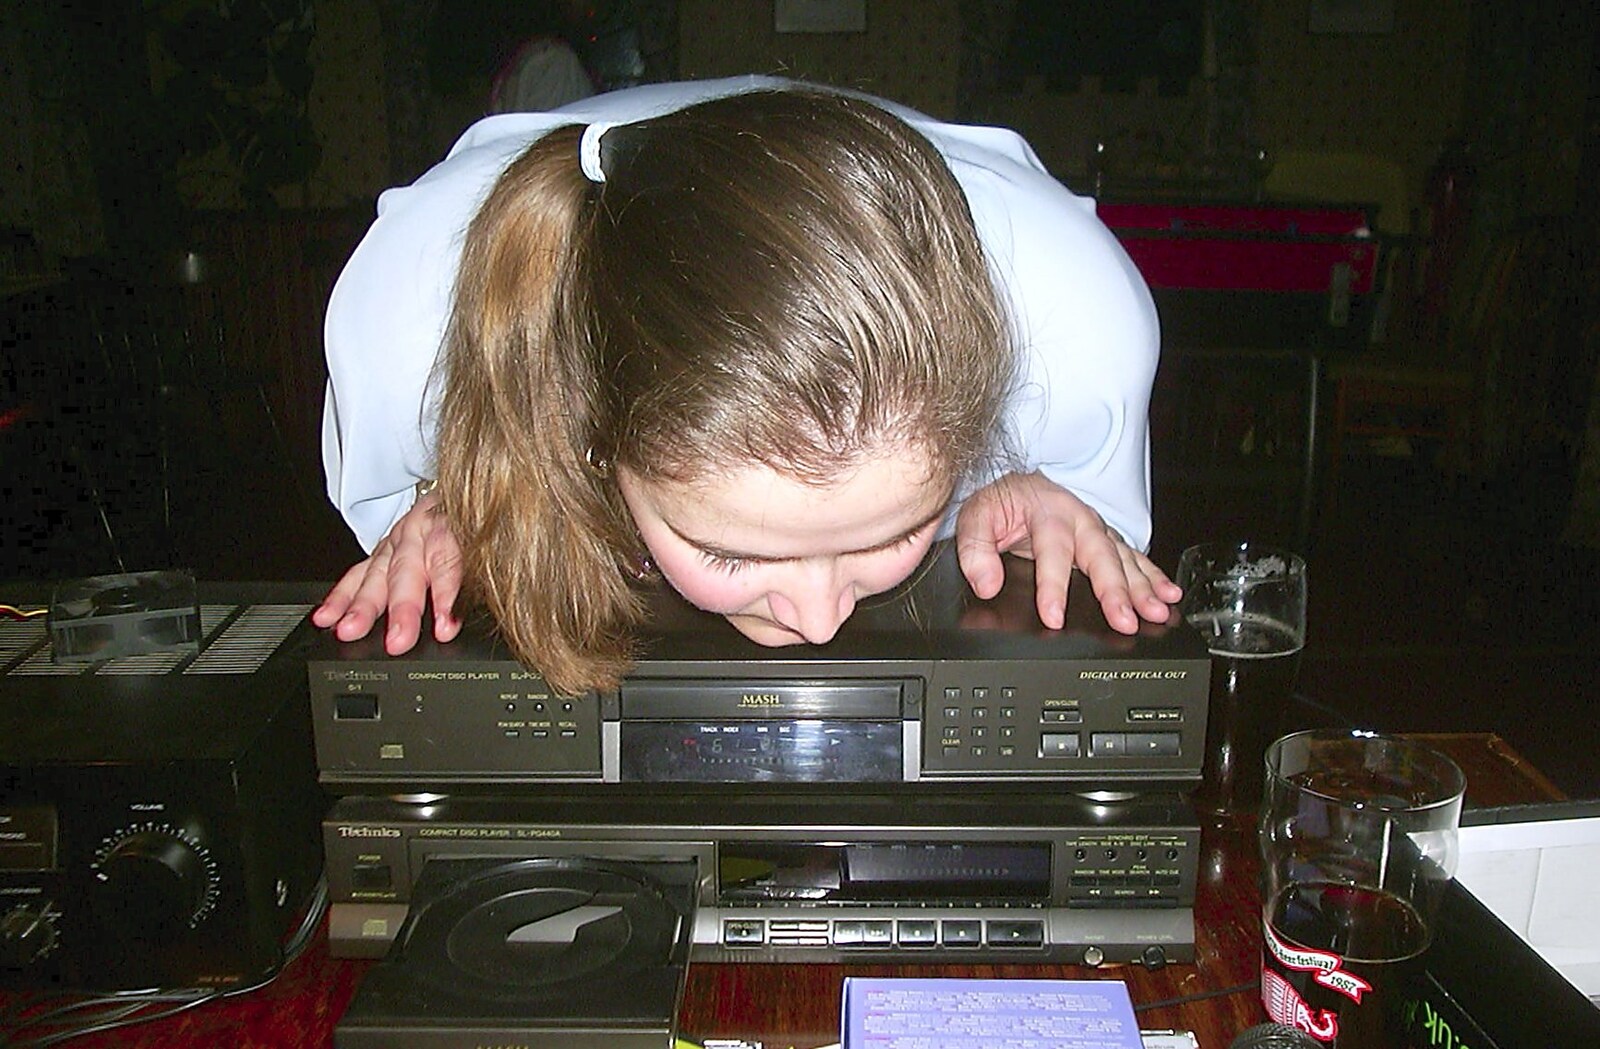 Claire inspects the tunes from Twenty Years at The Swan Inn, Brome, Suffolk - 15th November 2003